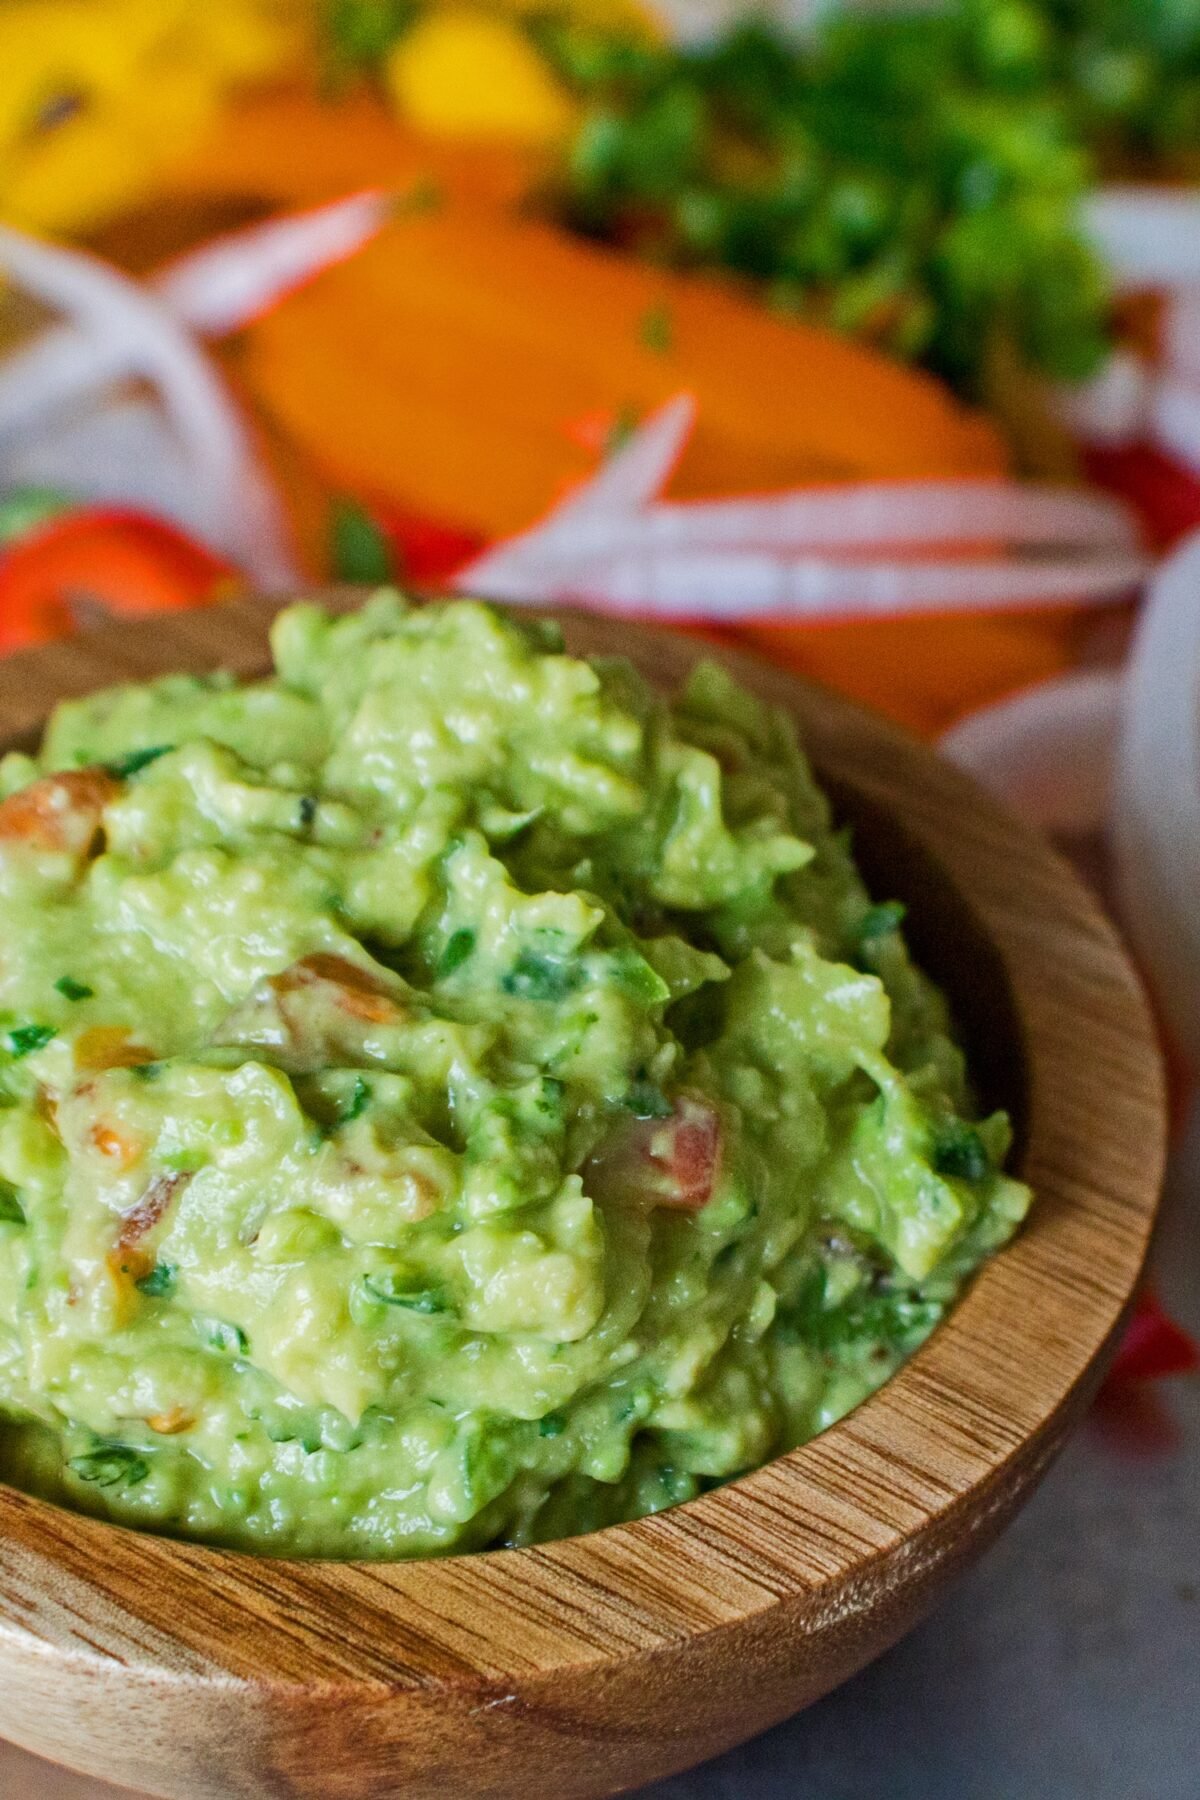 This super easy to make hatch chile guacamole takes wonderful flavor to another level!